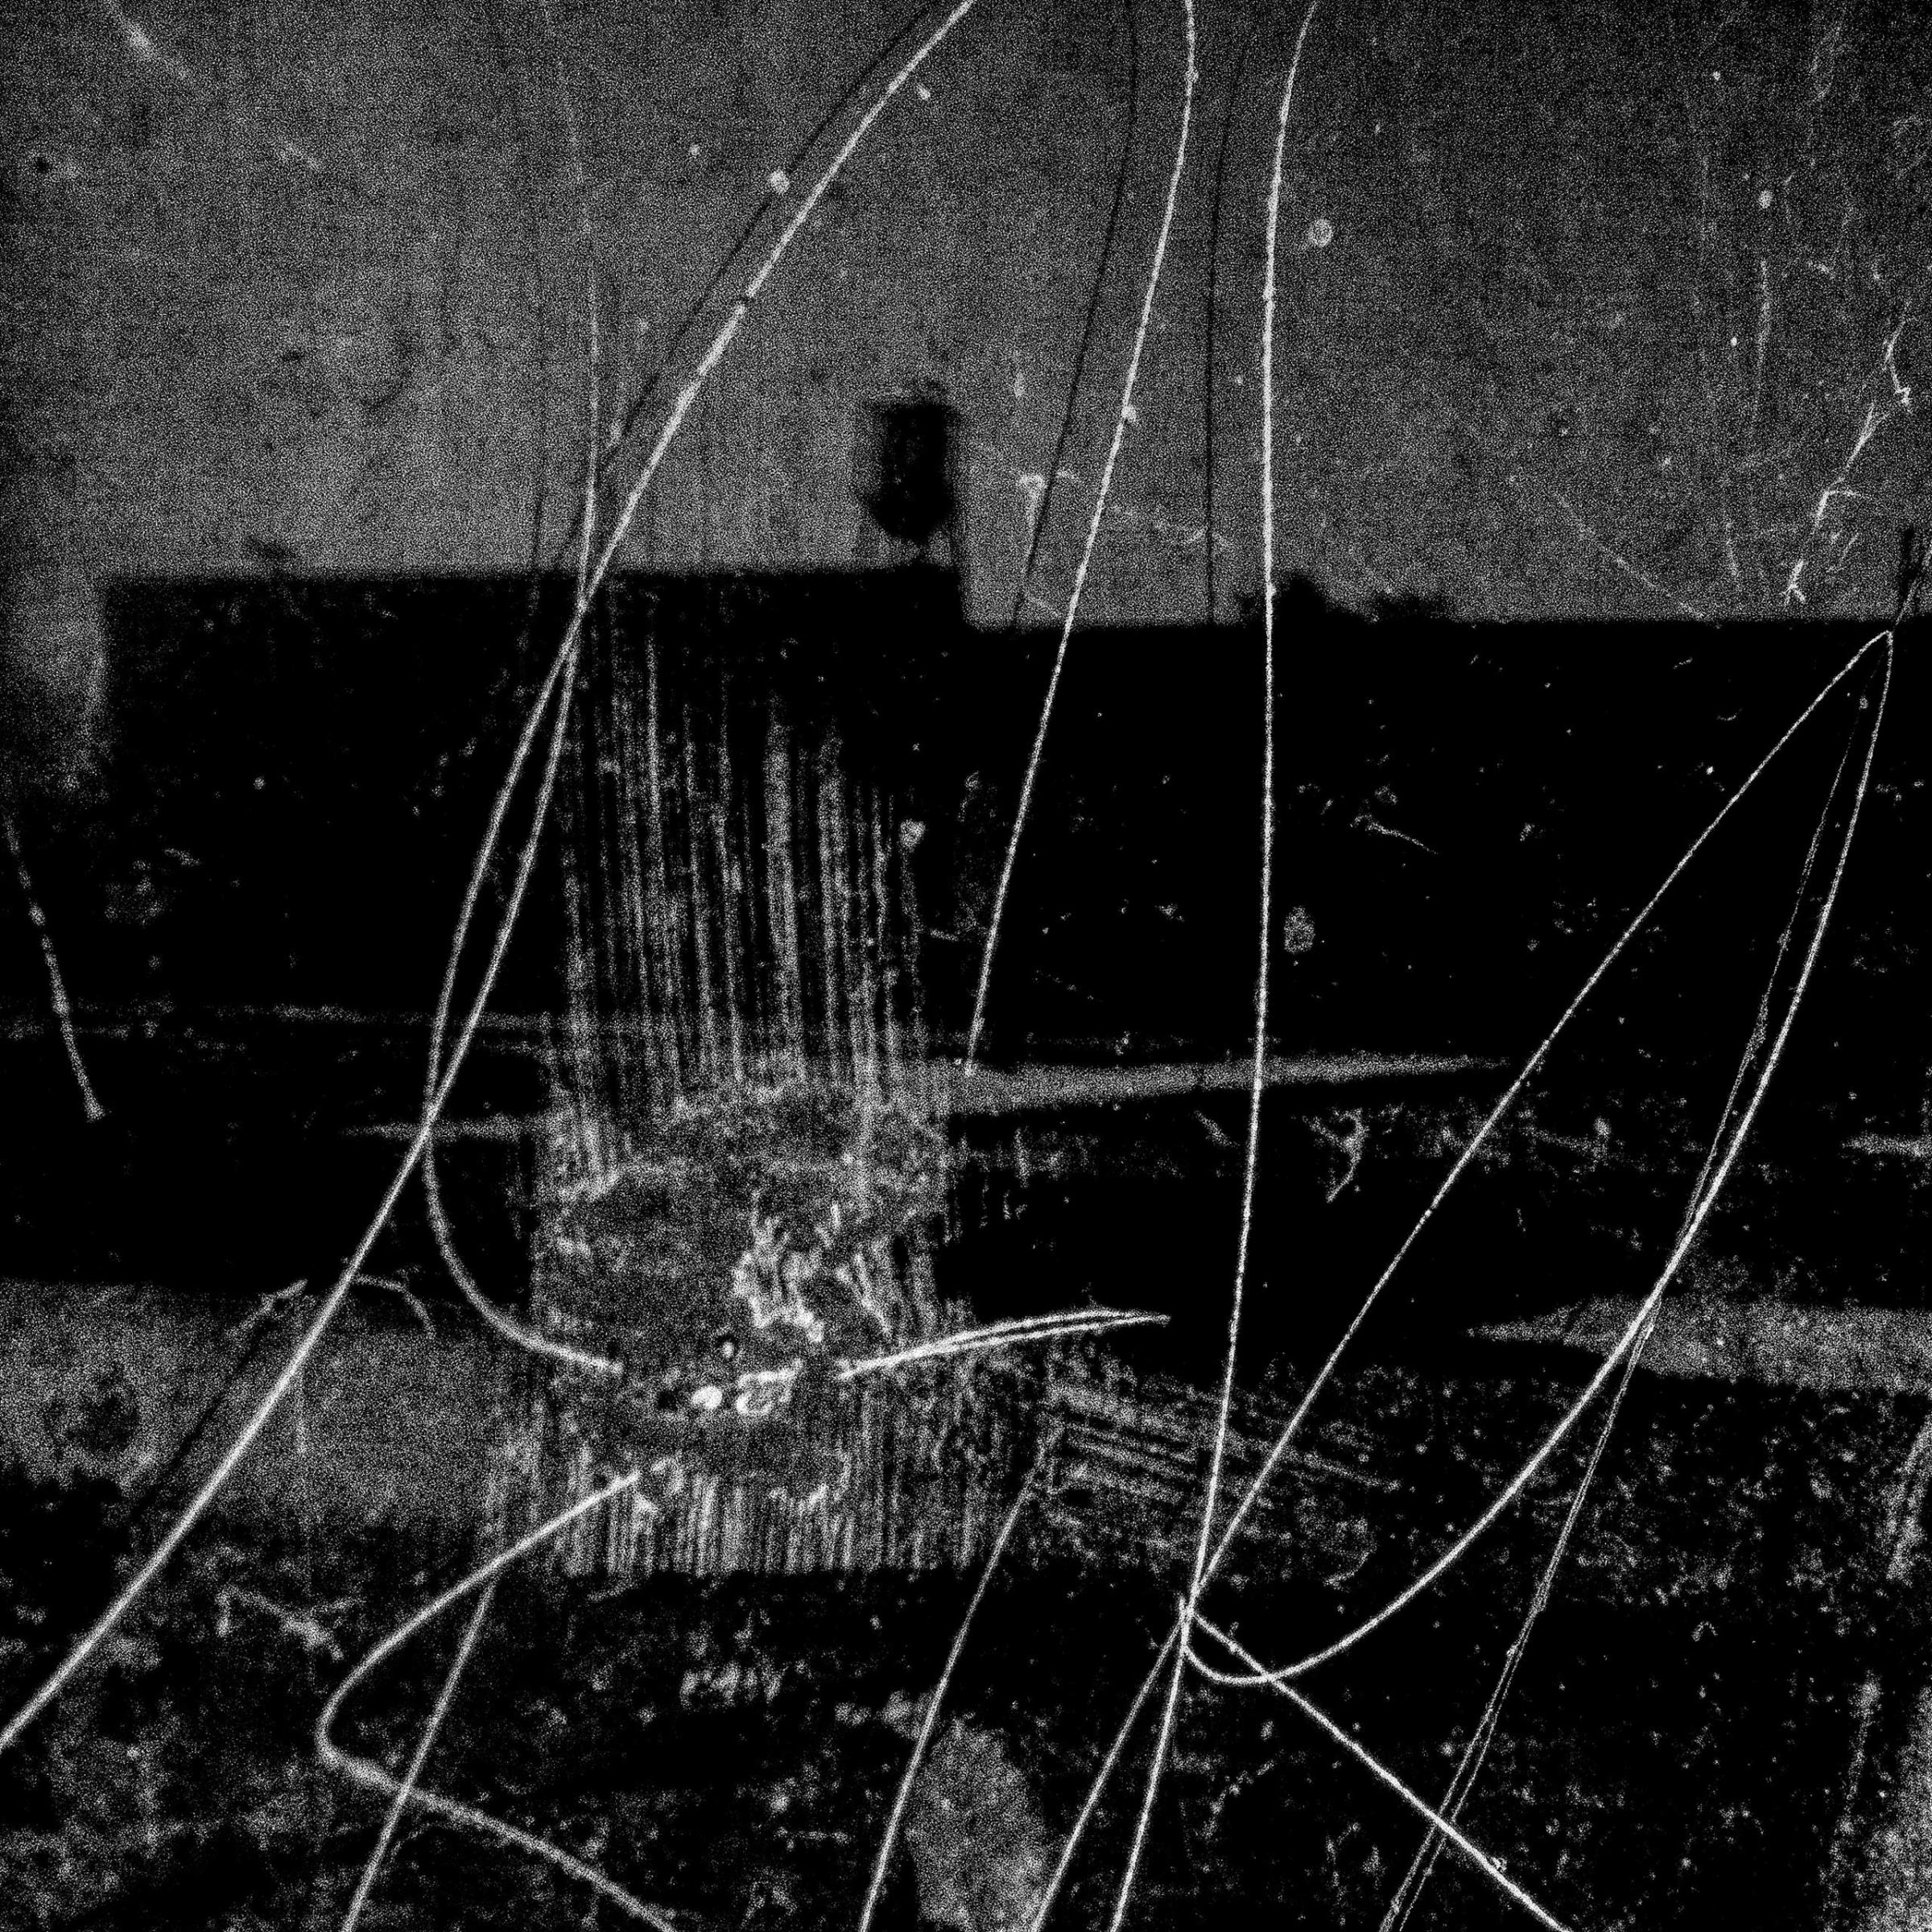 Scratched window. Stratford, CA. Stratford is a town in Kings County, California, United States. The population was 1,277 at the 2010 census. Residents have a $11,380 per capita income and 39.2% live below the poverty level. 36°11'21"N 119°49'24"W #geographyofpoverty (Matt Black)